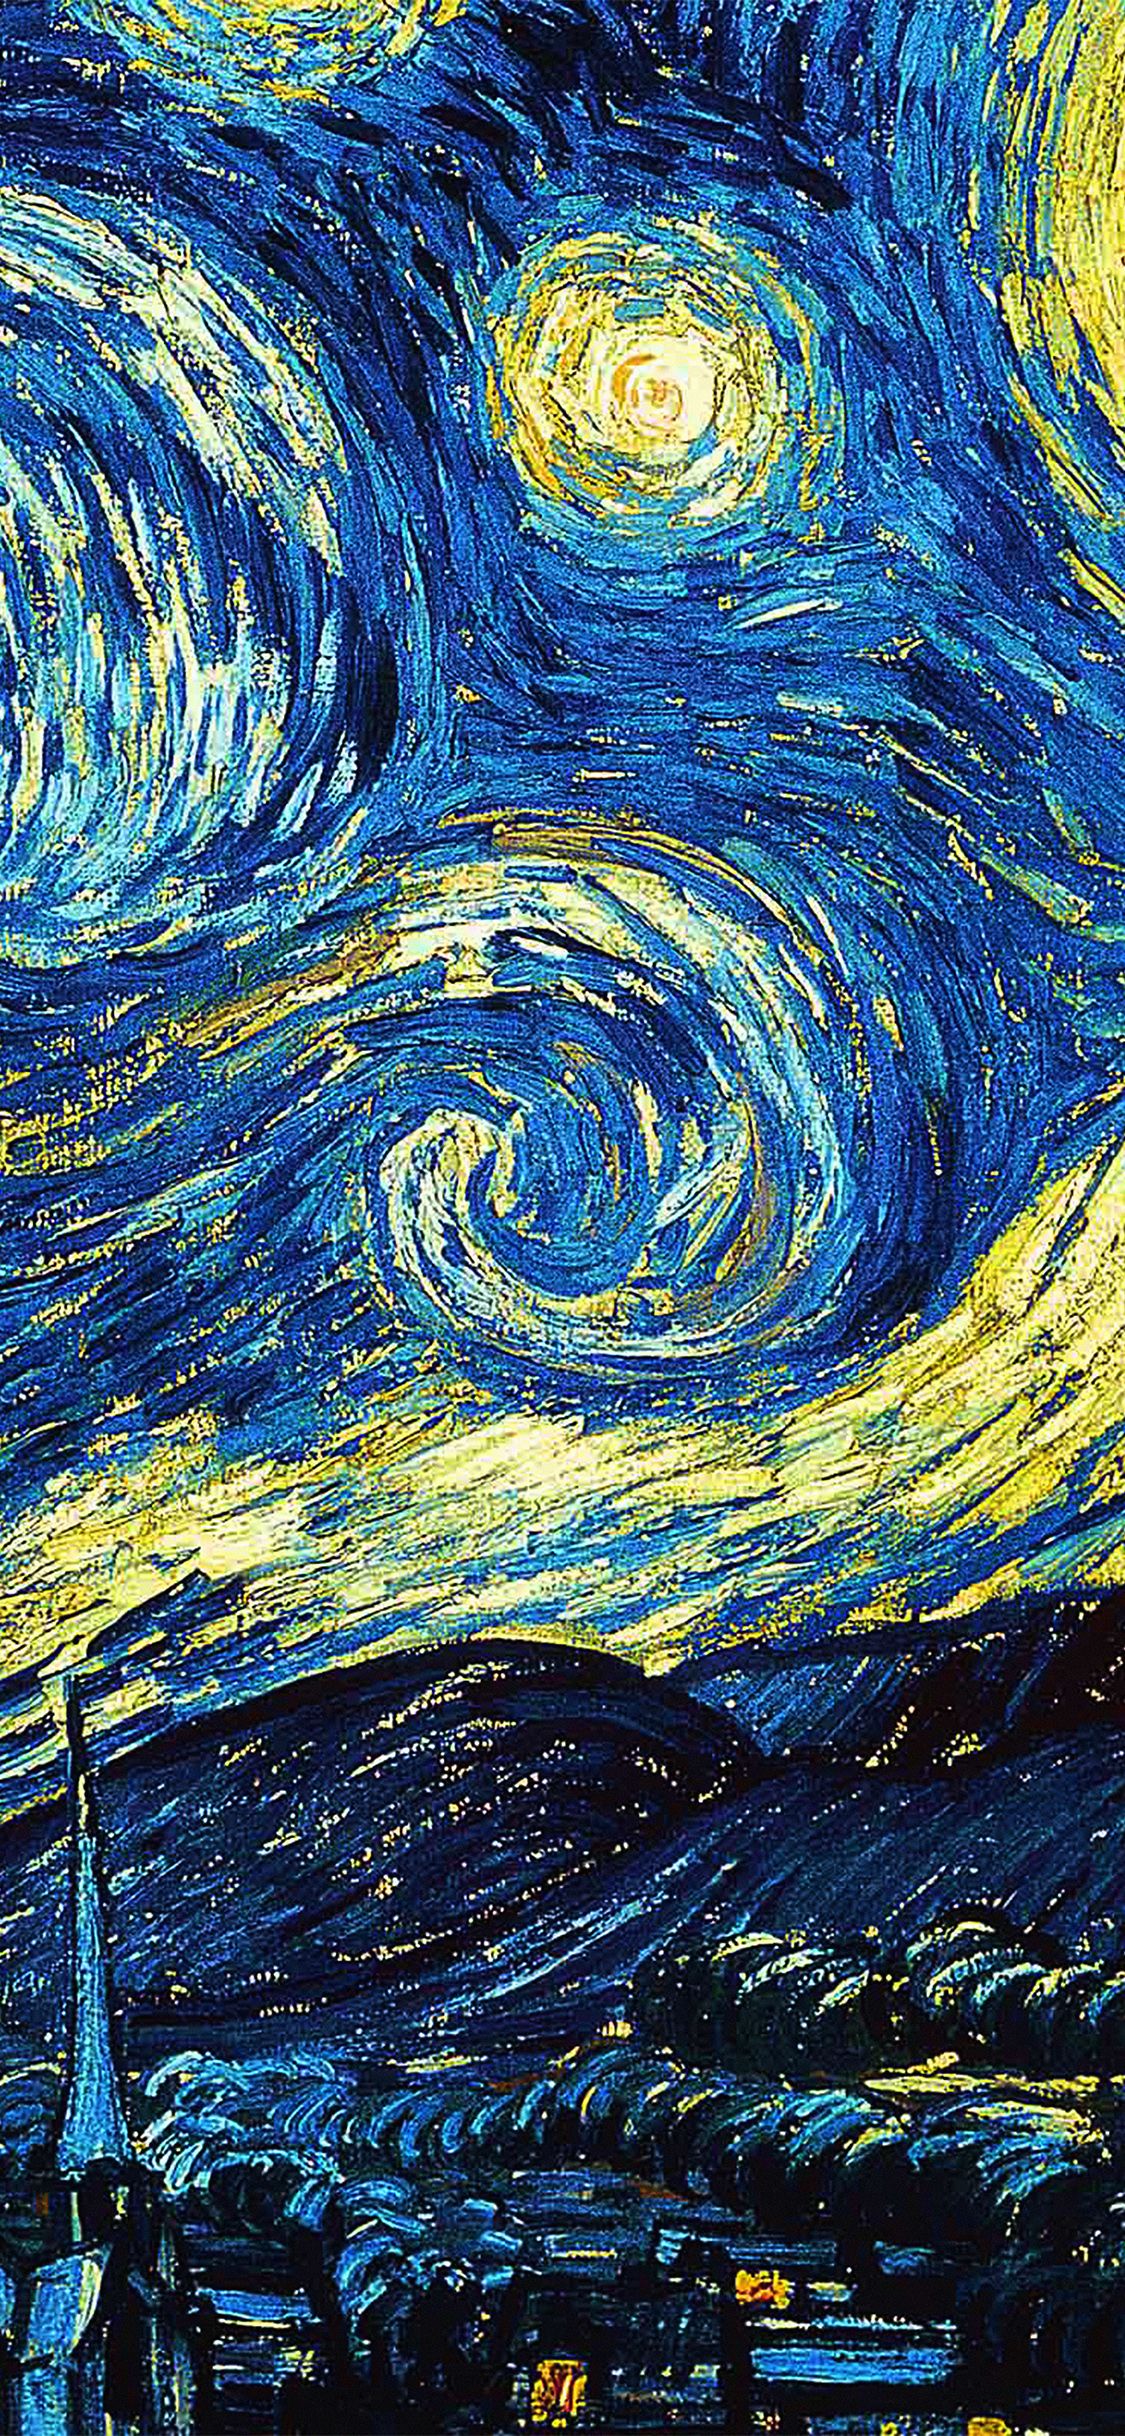 FREE Cheery Christmas Wallpaper For iPhone Christmas Aesthetic Wallpaper 2020. Starry night van gogh, Van gogh wallpaper, Starry night art